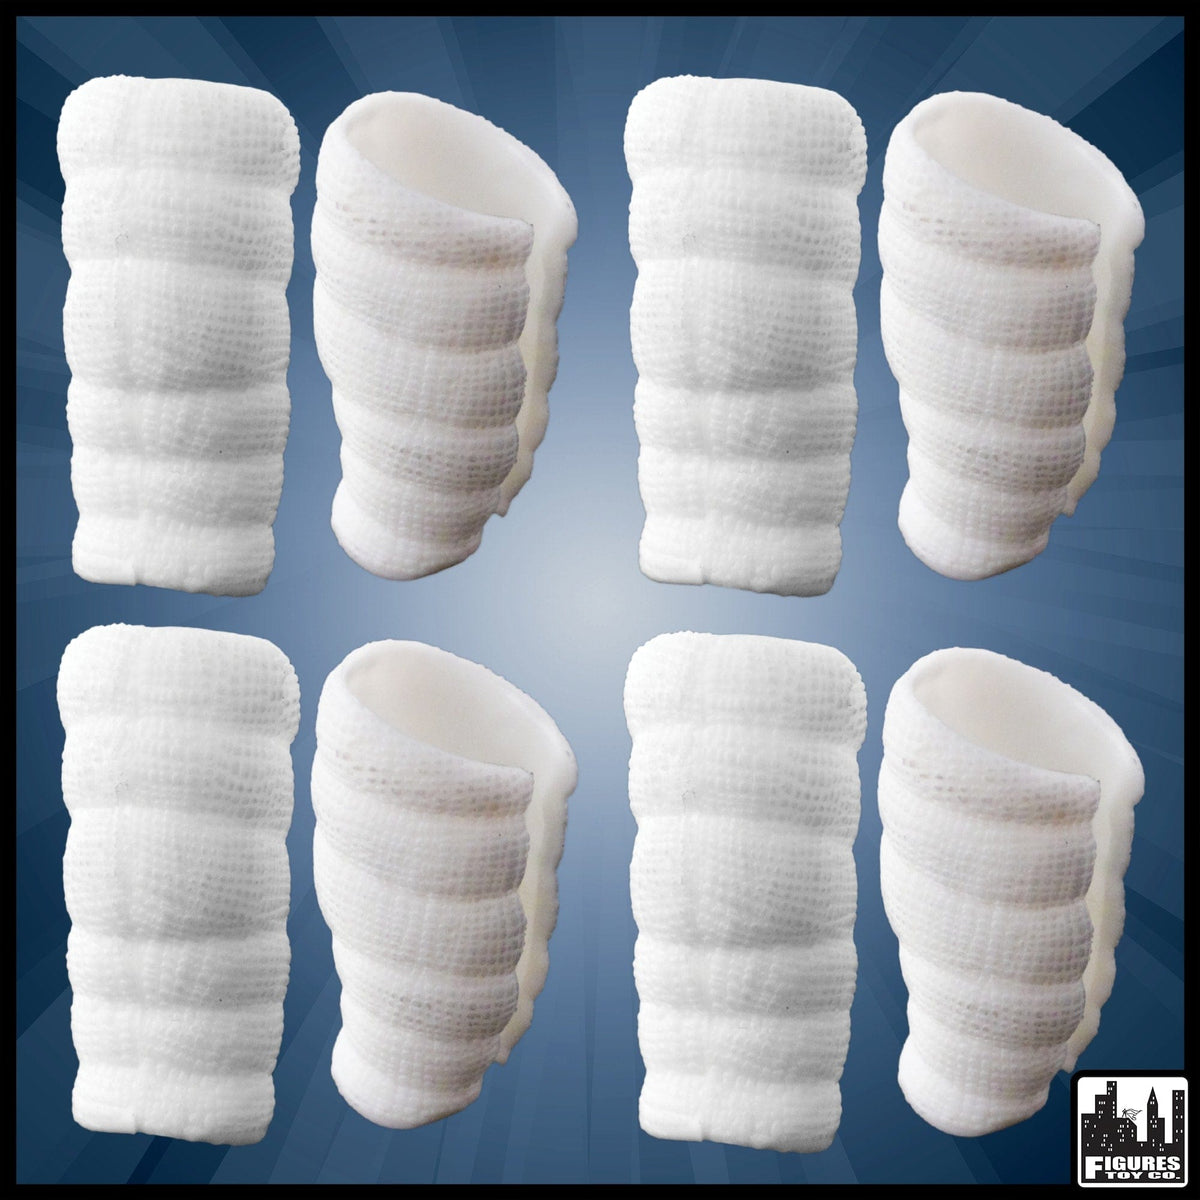 4 Pairs of Leg Casts for WWE Wrestling Action Figures